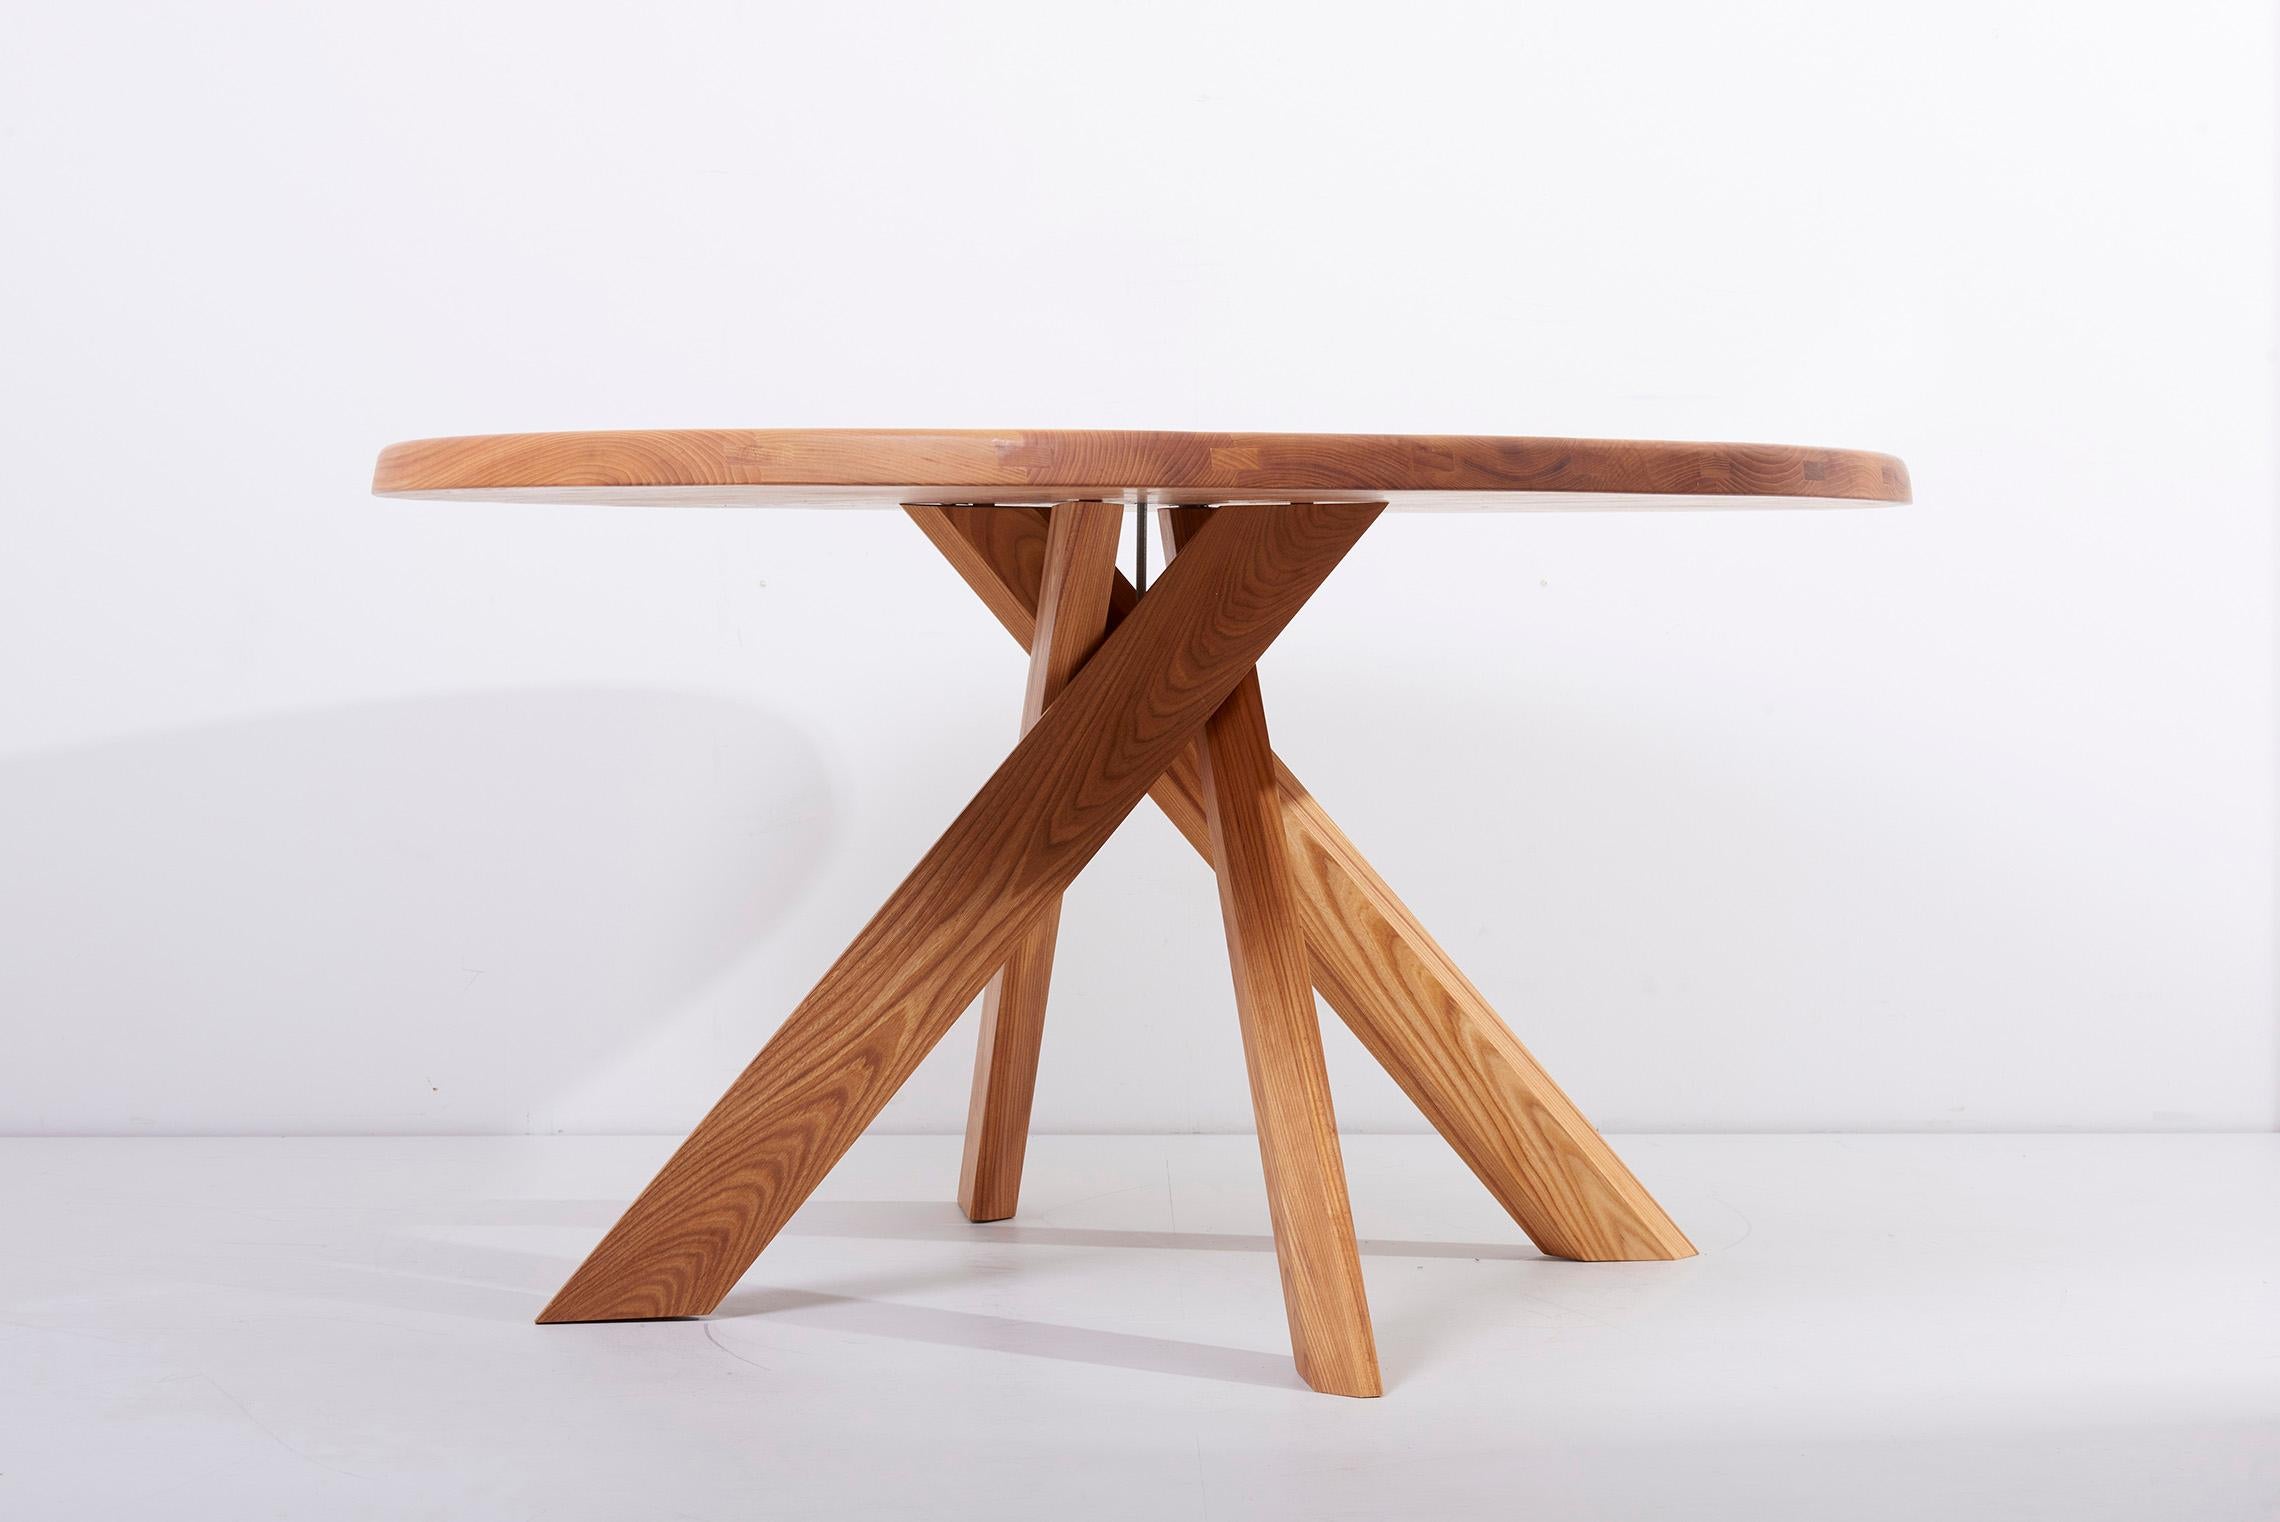 T21 dining table: A classic early 70s design by Pierre Chapo. The Table is made of elm wood (and available now). It can also be ordered in oak as well as in three different sizes (please get in touch with us considering the exact production lead